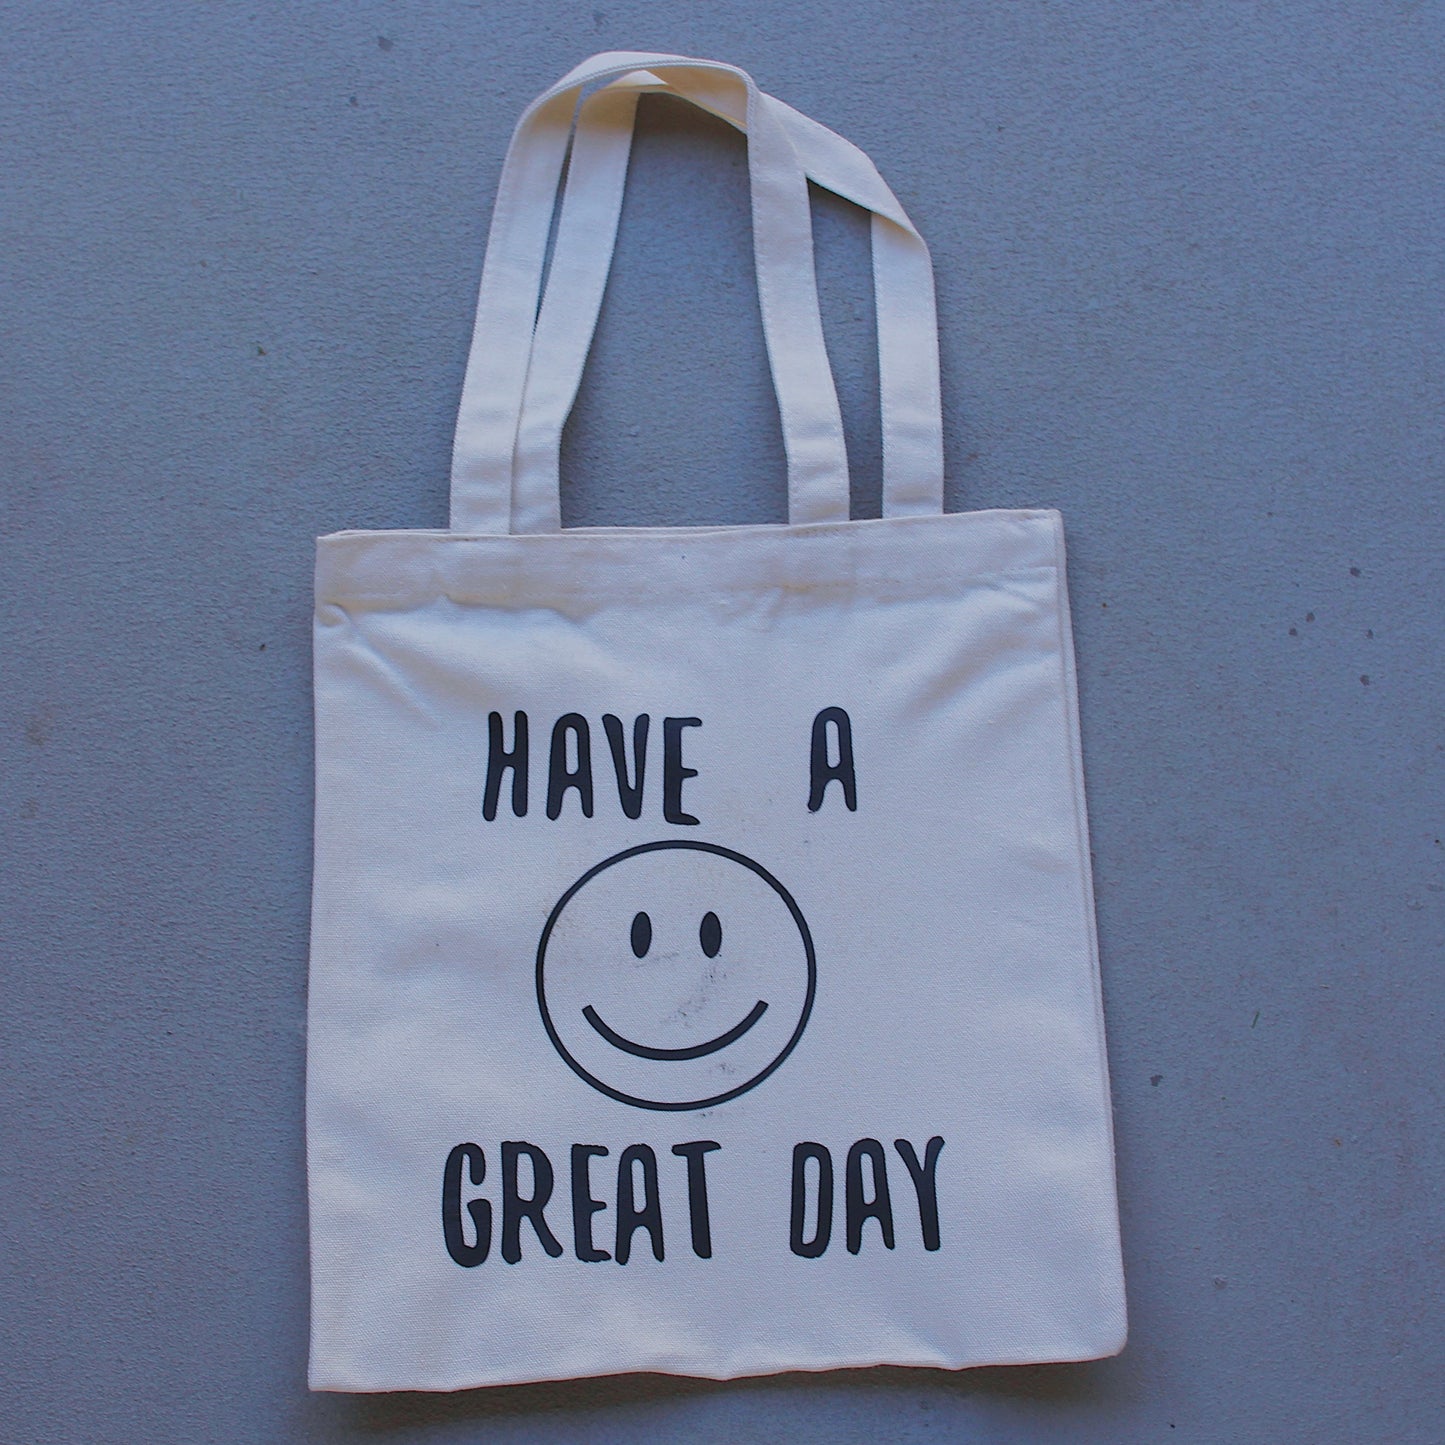 Have a Great Day tote - FAULTY